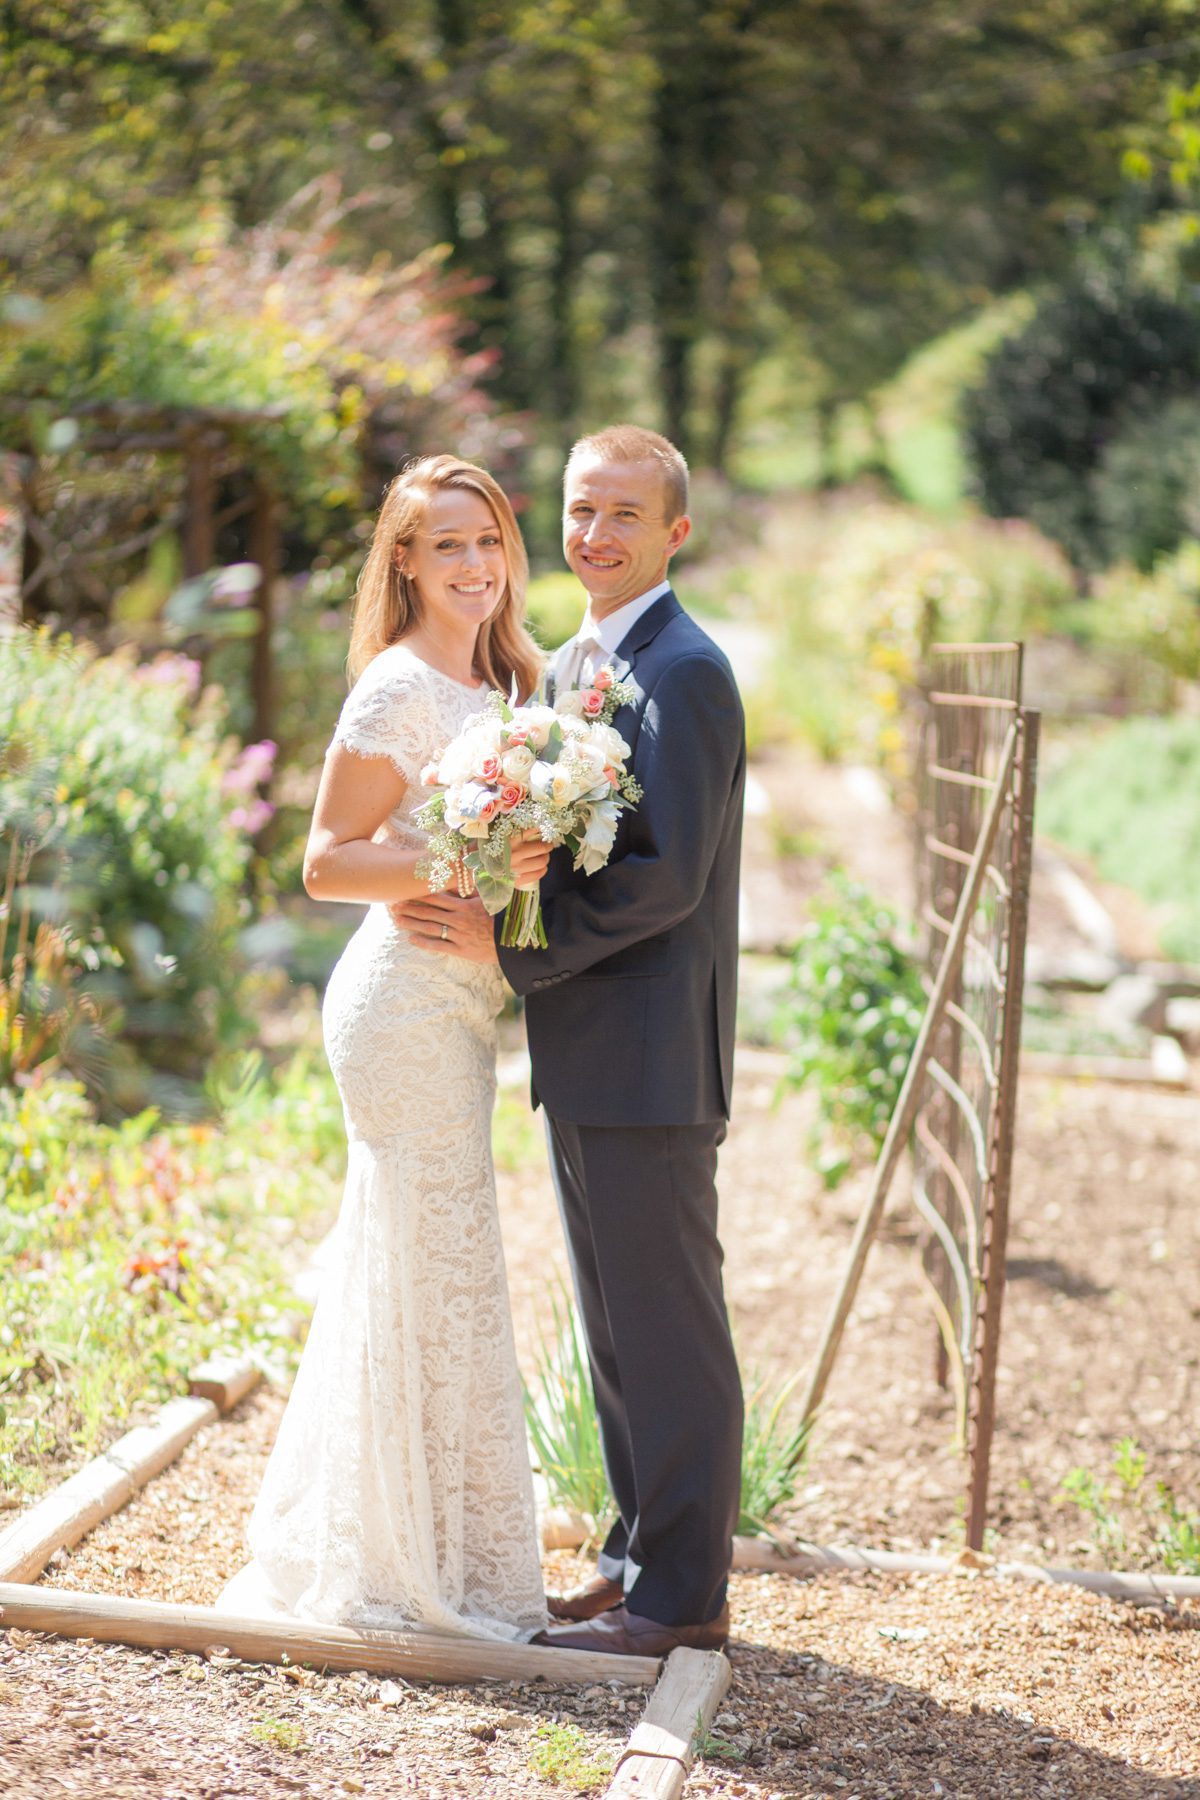 Bride and groom at Butterfly Hollow wedding in Gordonsville, TN / Photography by Krista Lee